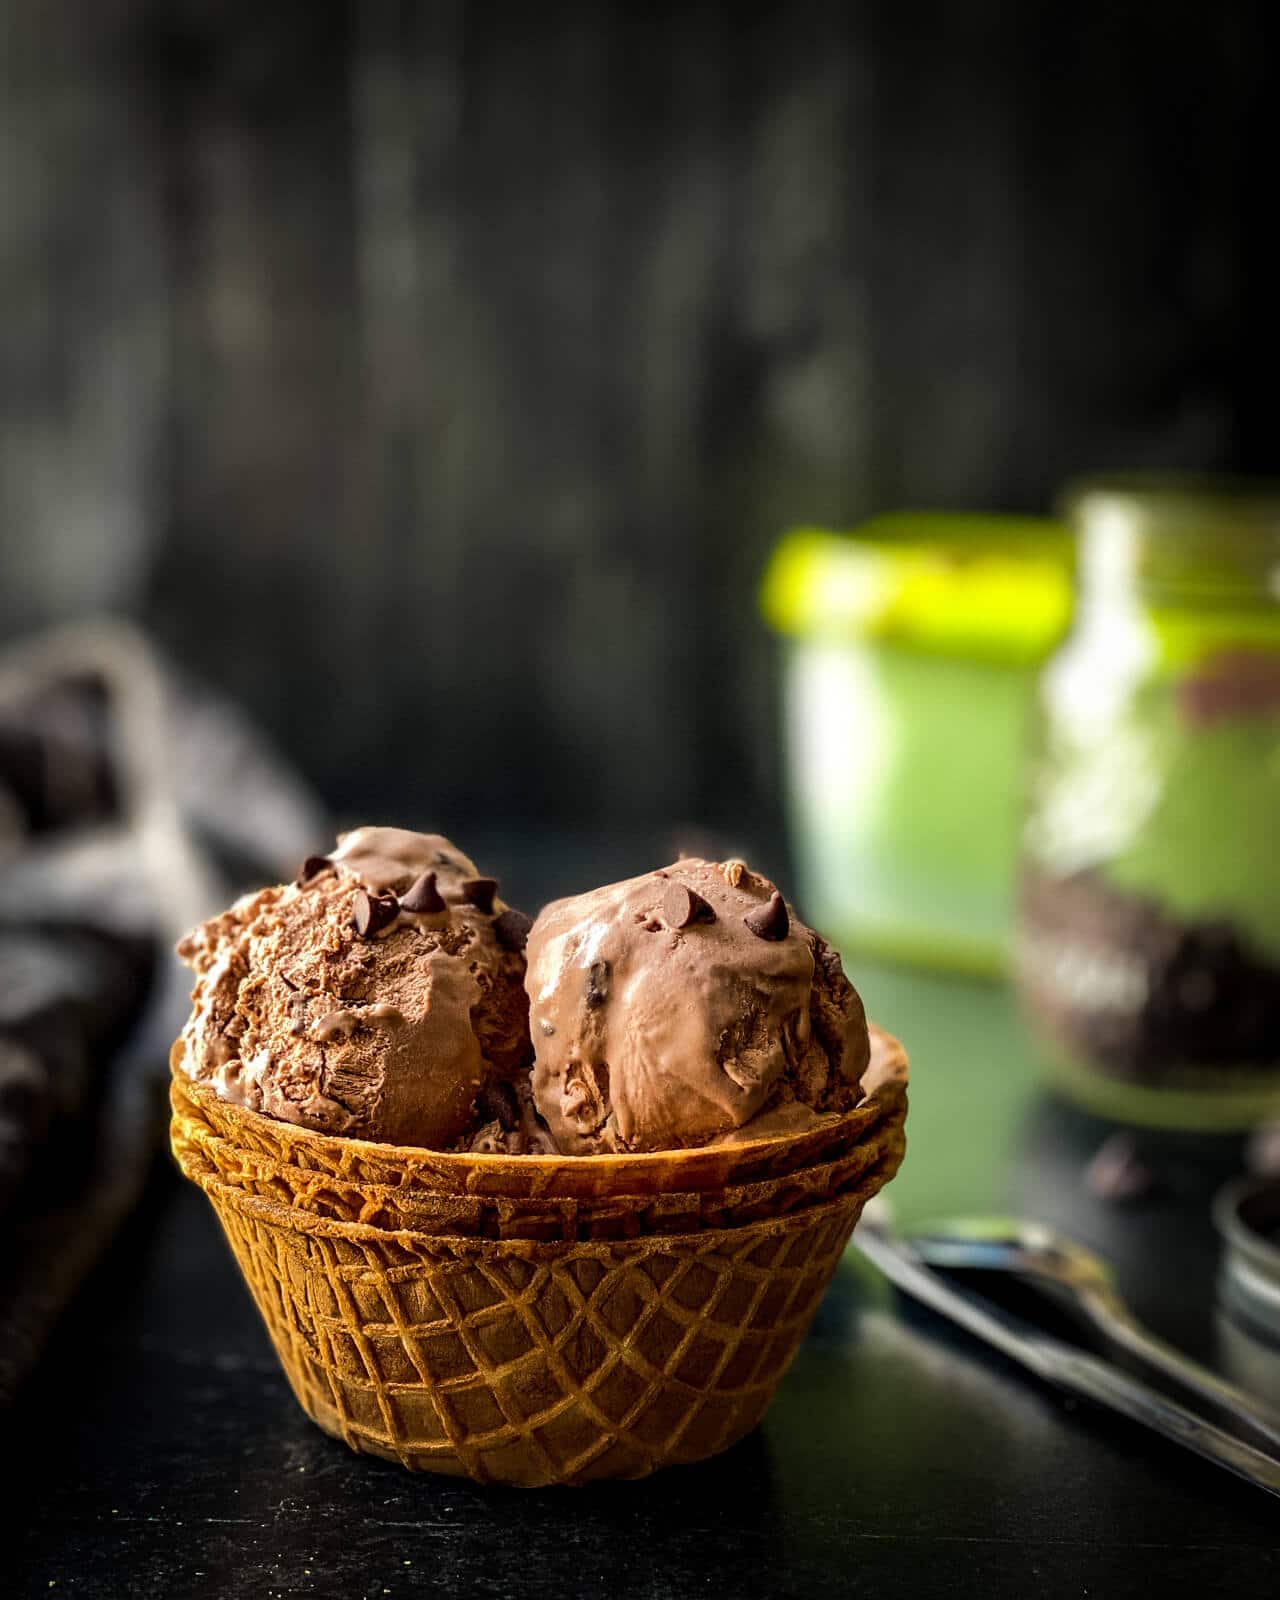 A waffle cone bowl with scoops of double chocolate ice cream on a wooden counter with a container of ice cream in the back.